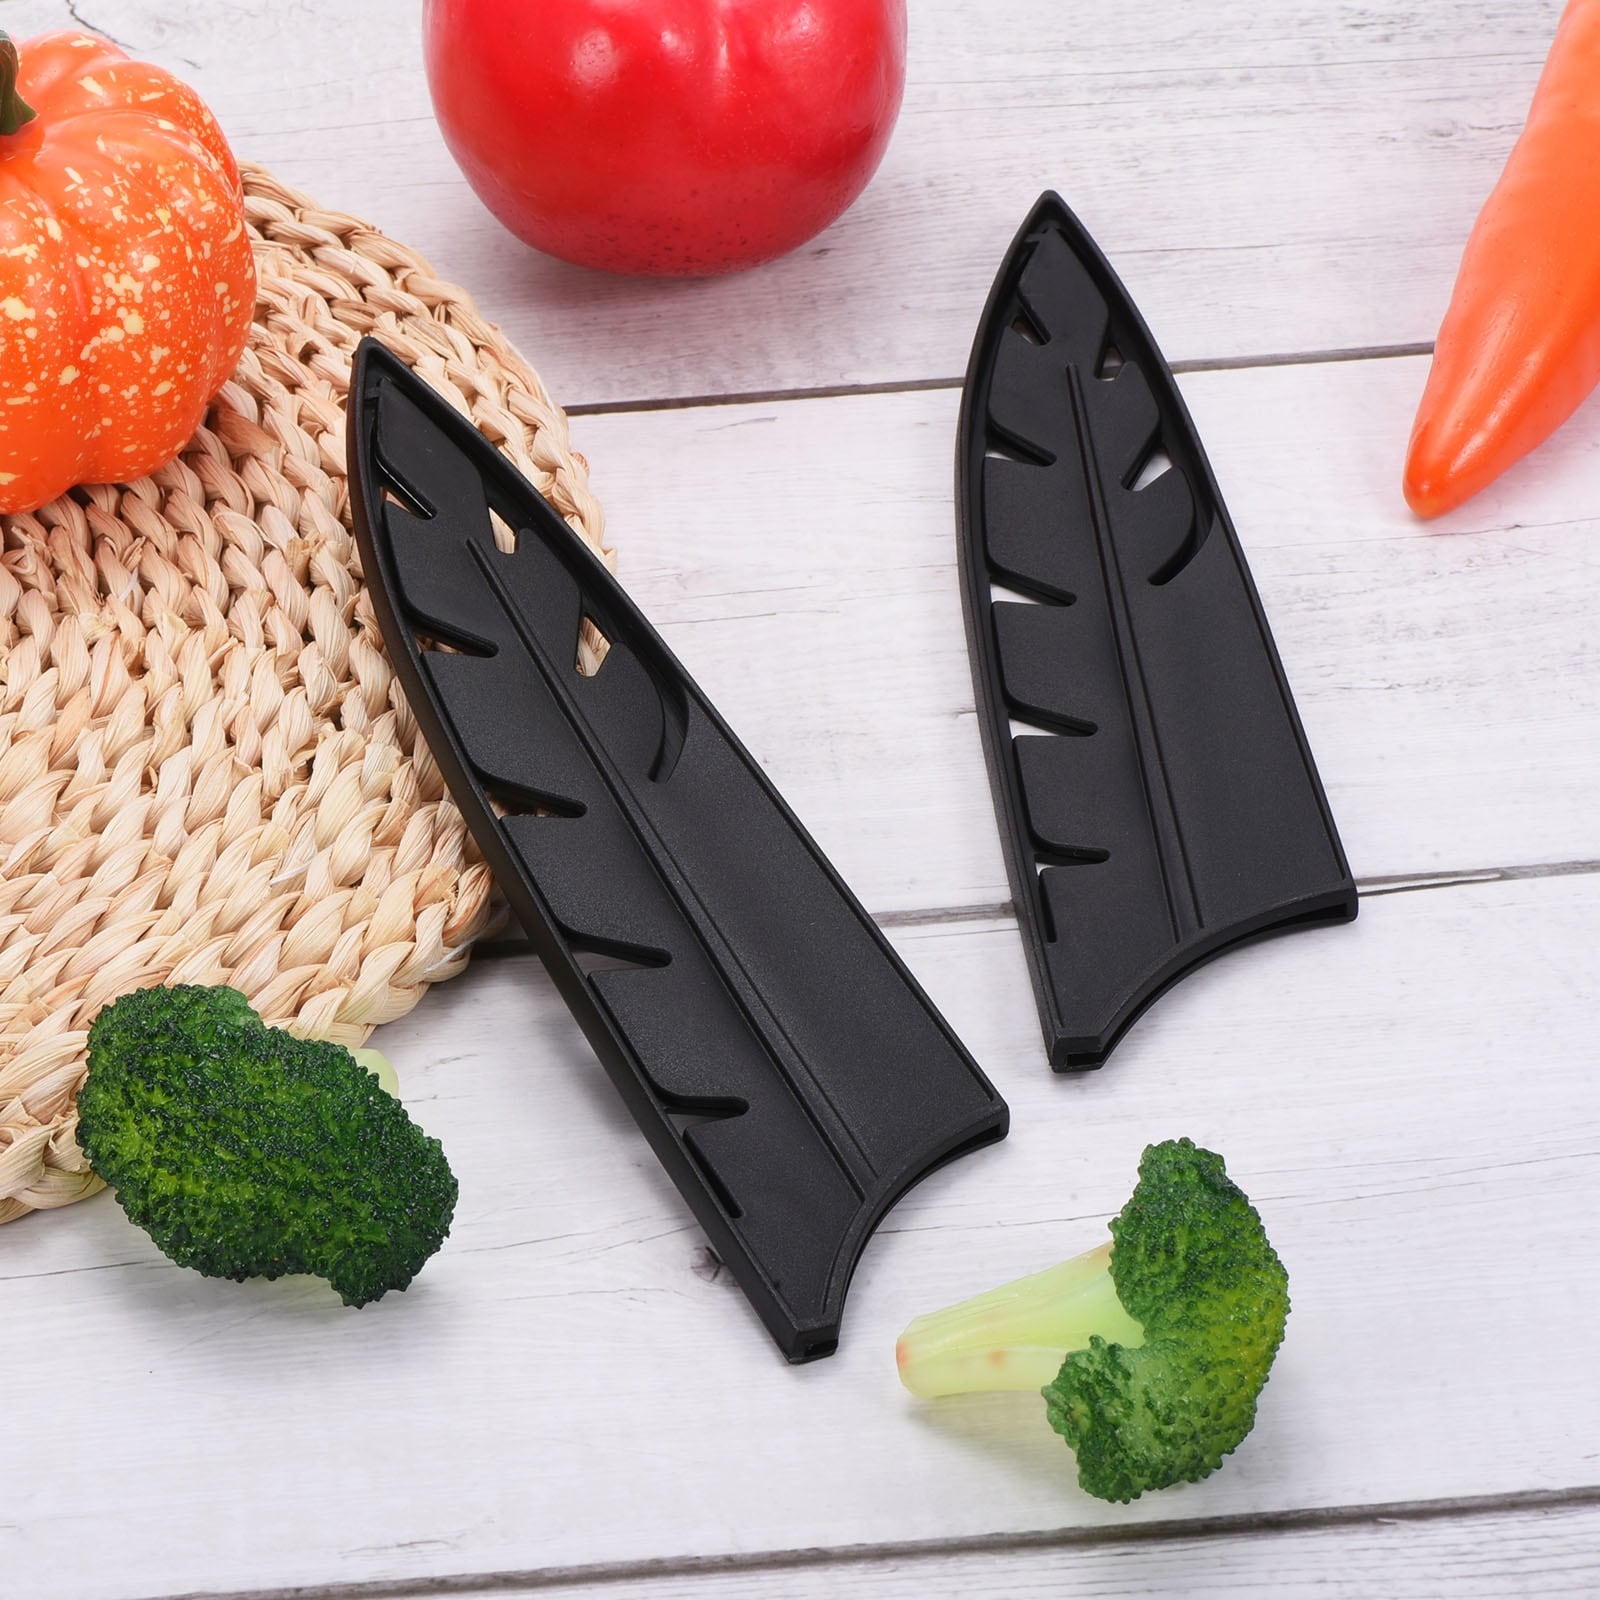 https://ak1.ostkcdn.com/images/products/is/images/direct/e080aaf101b6d701f2bedd79f42f4b55513fdc0d/Plastic-Kitchen-Knife-Sheath-Cover-Sleeves-for-8%22-Chef-Knife%2C-Black.jpg